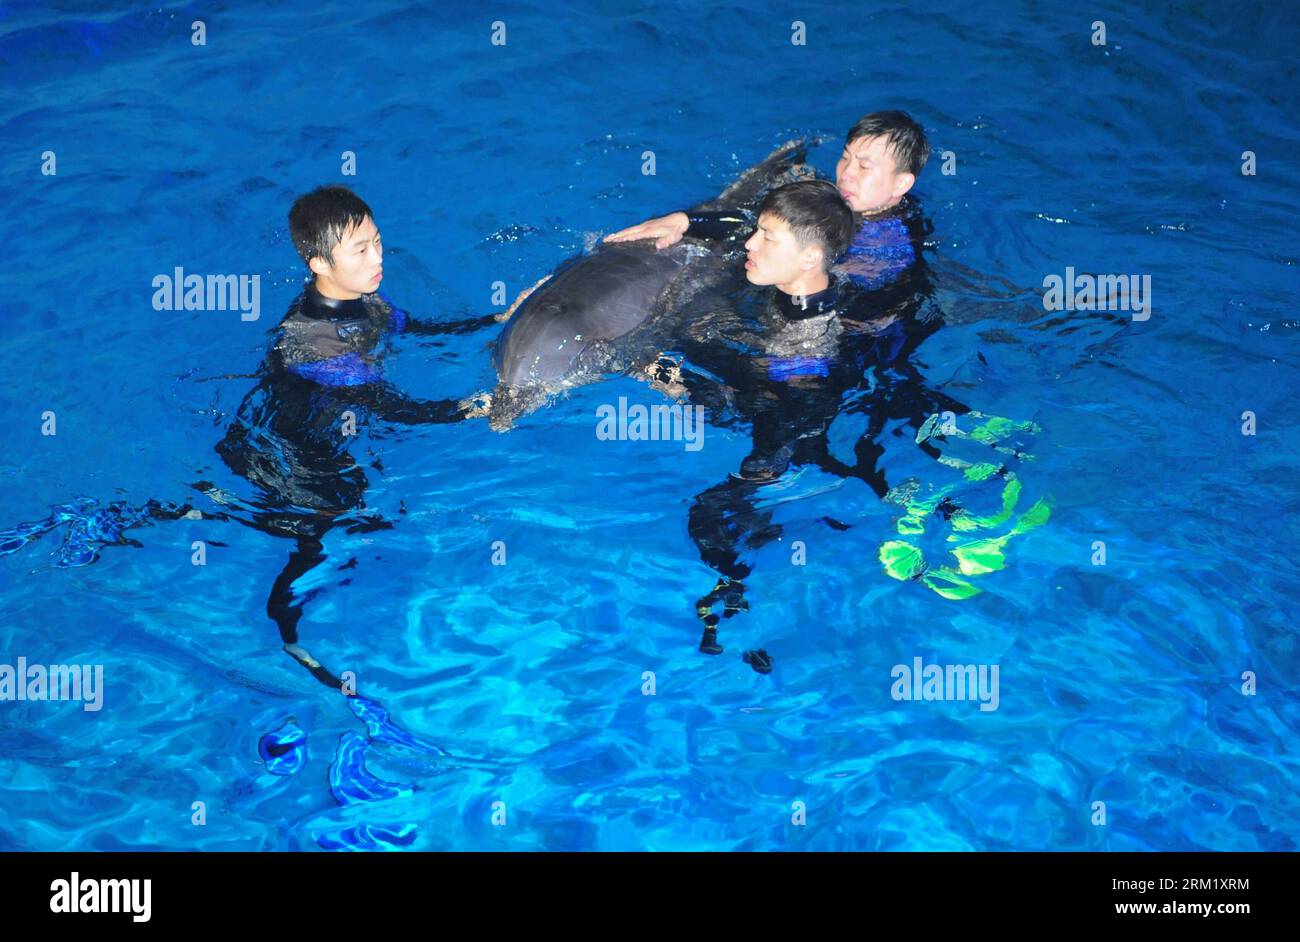 Bildnummer: 59647288  Datum: 15.05.2013  Copyright: imago/Xinhua (130515) -- YANTAI, May 15, 2013 (Xinhua) -- Workers help the arrived dolphins adapt the new environment in a breeding pool of the Ocean Aquarium of Penglai in Penglai City, east China s Shandong Province, May 15, 2013. Ten dolphins, arriving in Yantai of Shandong Province from Osaka of Japan on May 14, with an average age of 2 to 3 and an average weight of 200 to 700 kilograms, are about 3 meters in length and will see the public after 1 to 3 months of adaptation. (Xinhua/Chu Yang) (zwx) CHINA-SHANDONG-PENGLAI-DOLPHINS FROM JAPA Stock Photo